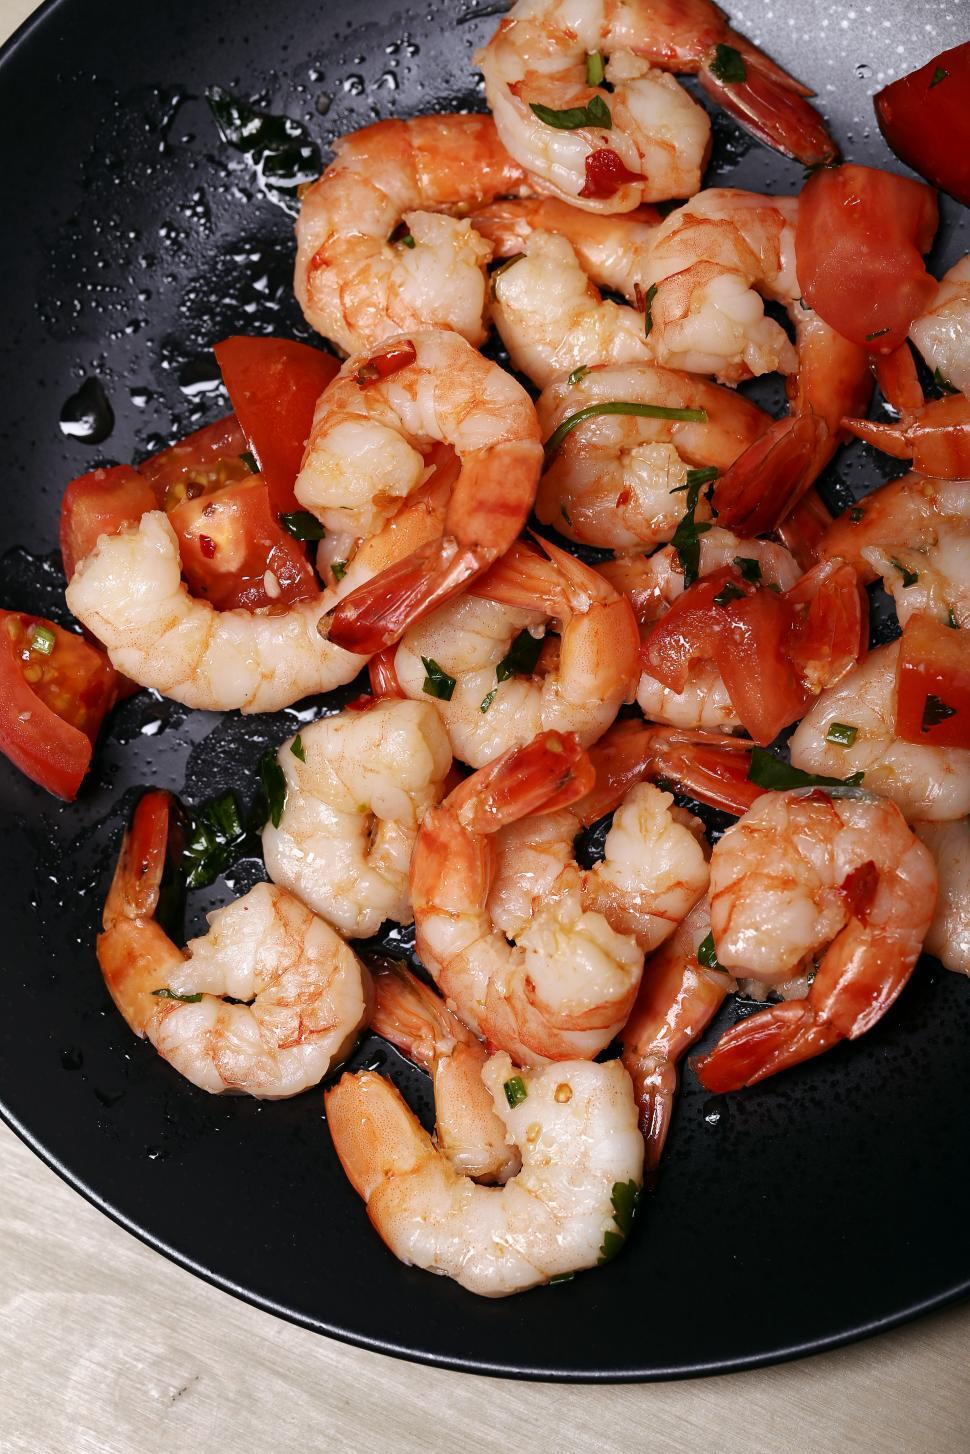 Free Image of Shrimps. Heap of shrimps in a dish 